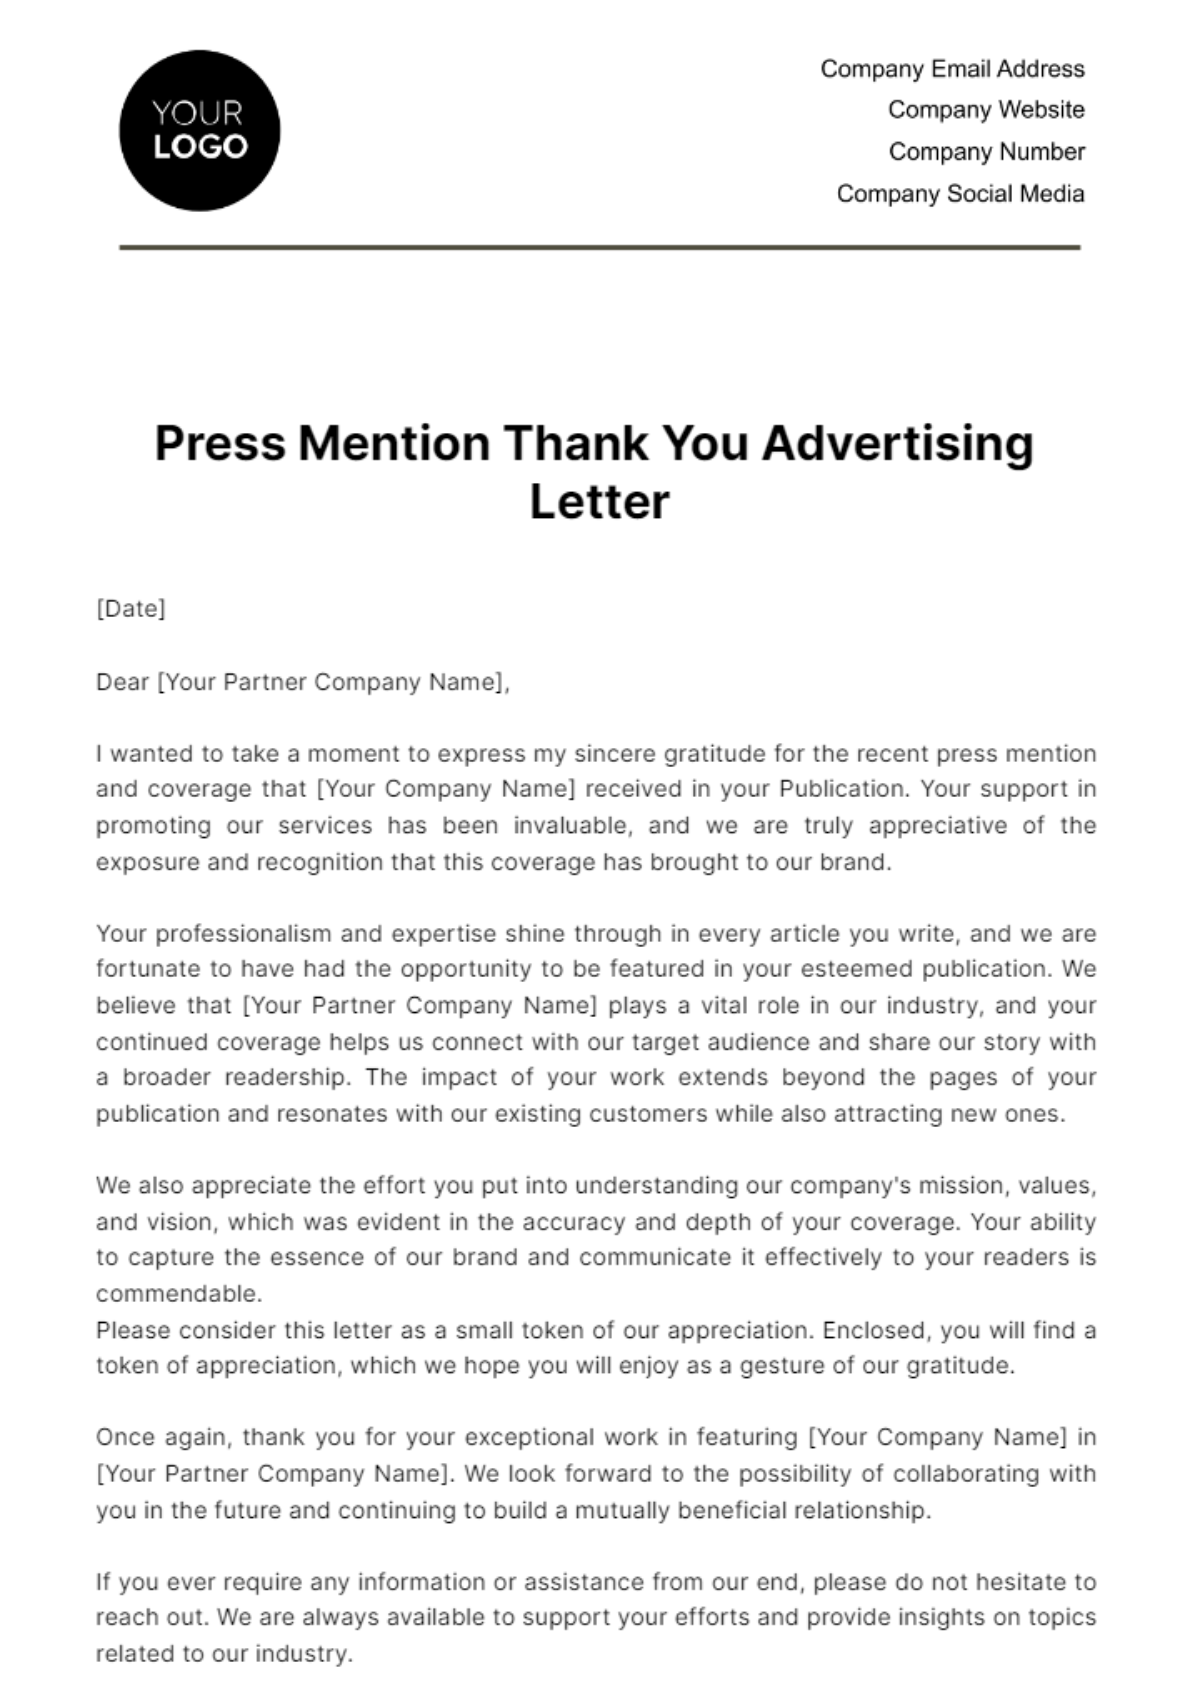 Free Press Mention Thank You Advertising Letter Template